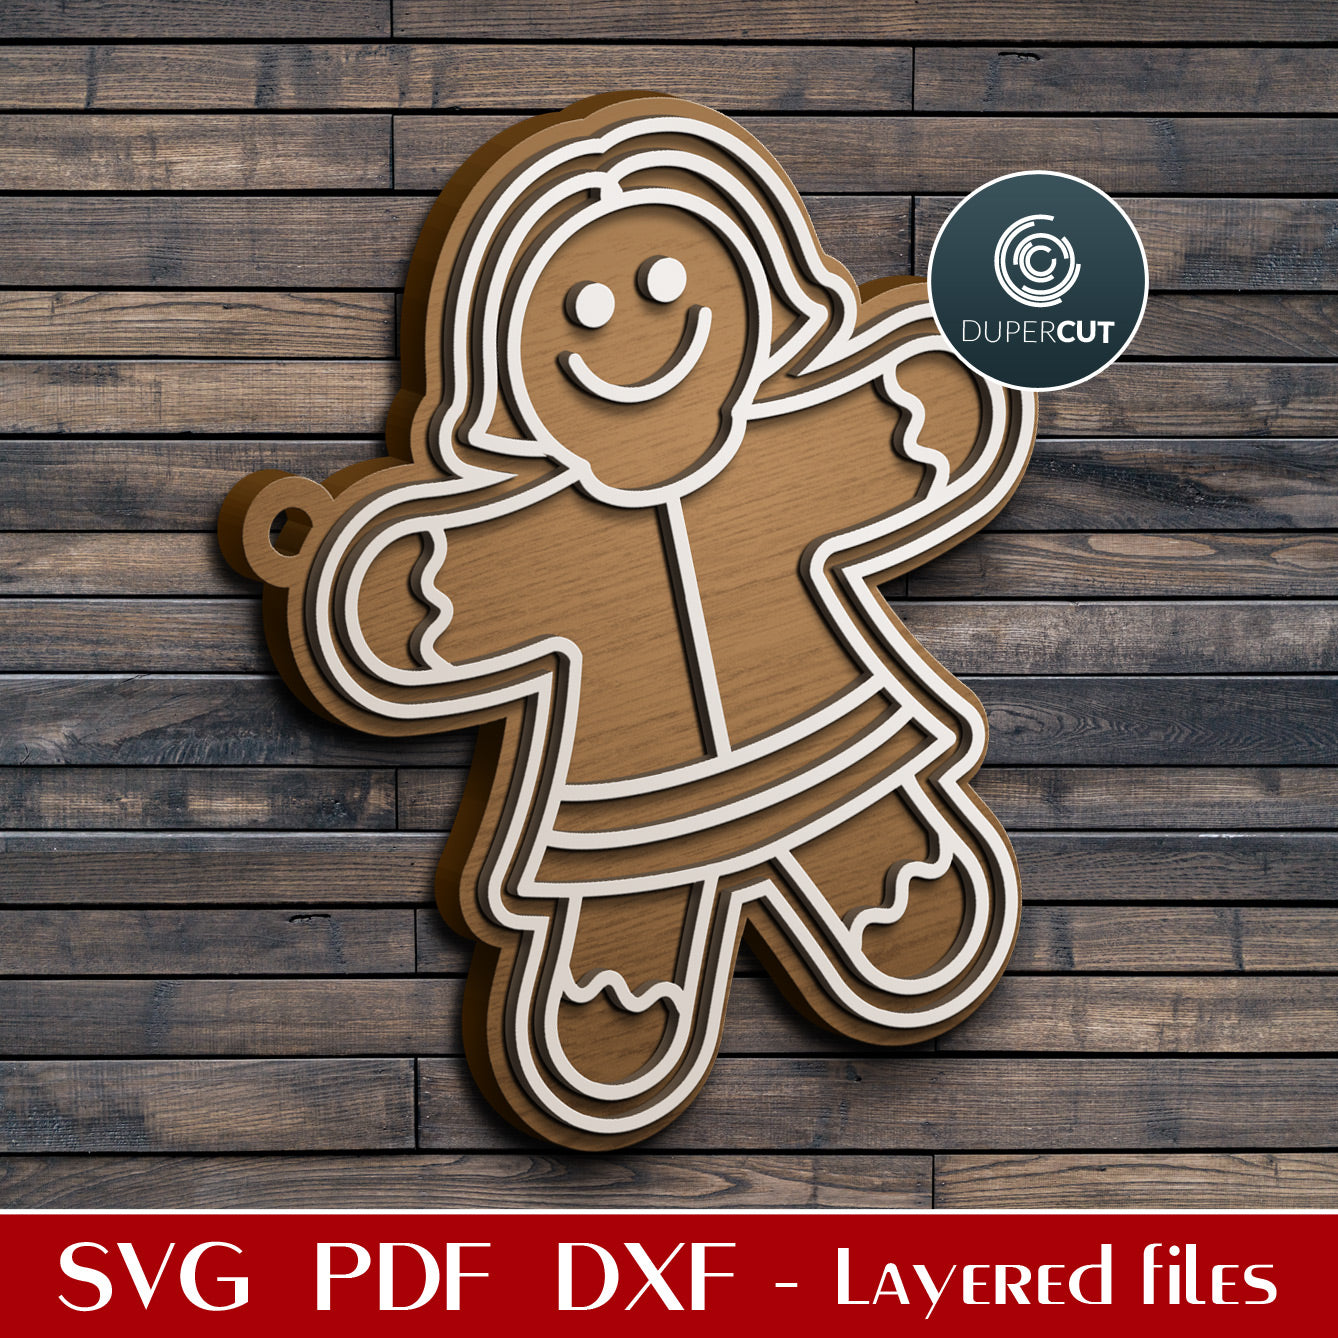 Gingerbread Girl - Holiday ornament decoration SVG PDF DXF layered cutting files for Glowforge, Cricut, Silhouette, CNC plasma machines by DuperCut